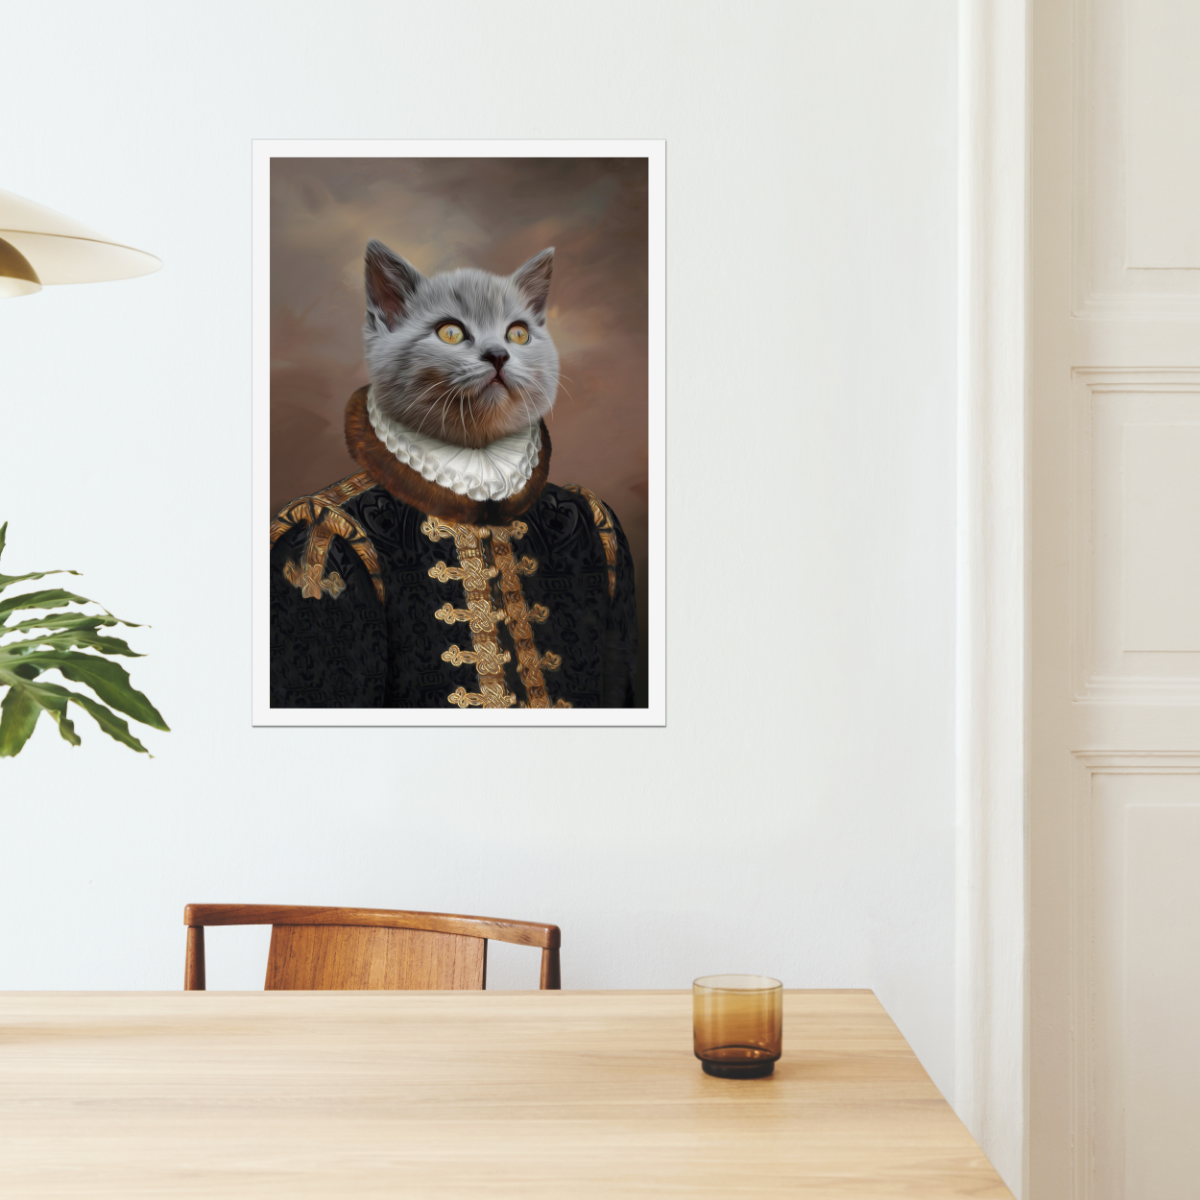 The Count: Custom Pet Poster - Paw & Glory - #pet portraits# - #dog portraits# - #pet portraits uk#Paw & Glory, paw and glory, crown and paw rabbit art paws pet portraits in oil etsy animal portrait custom pet oil painting, turn your cat into art pet portrait